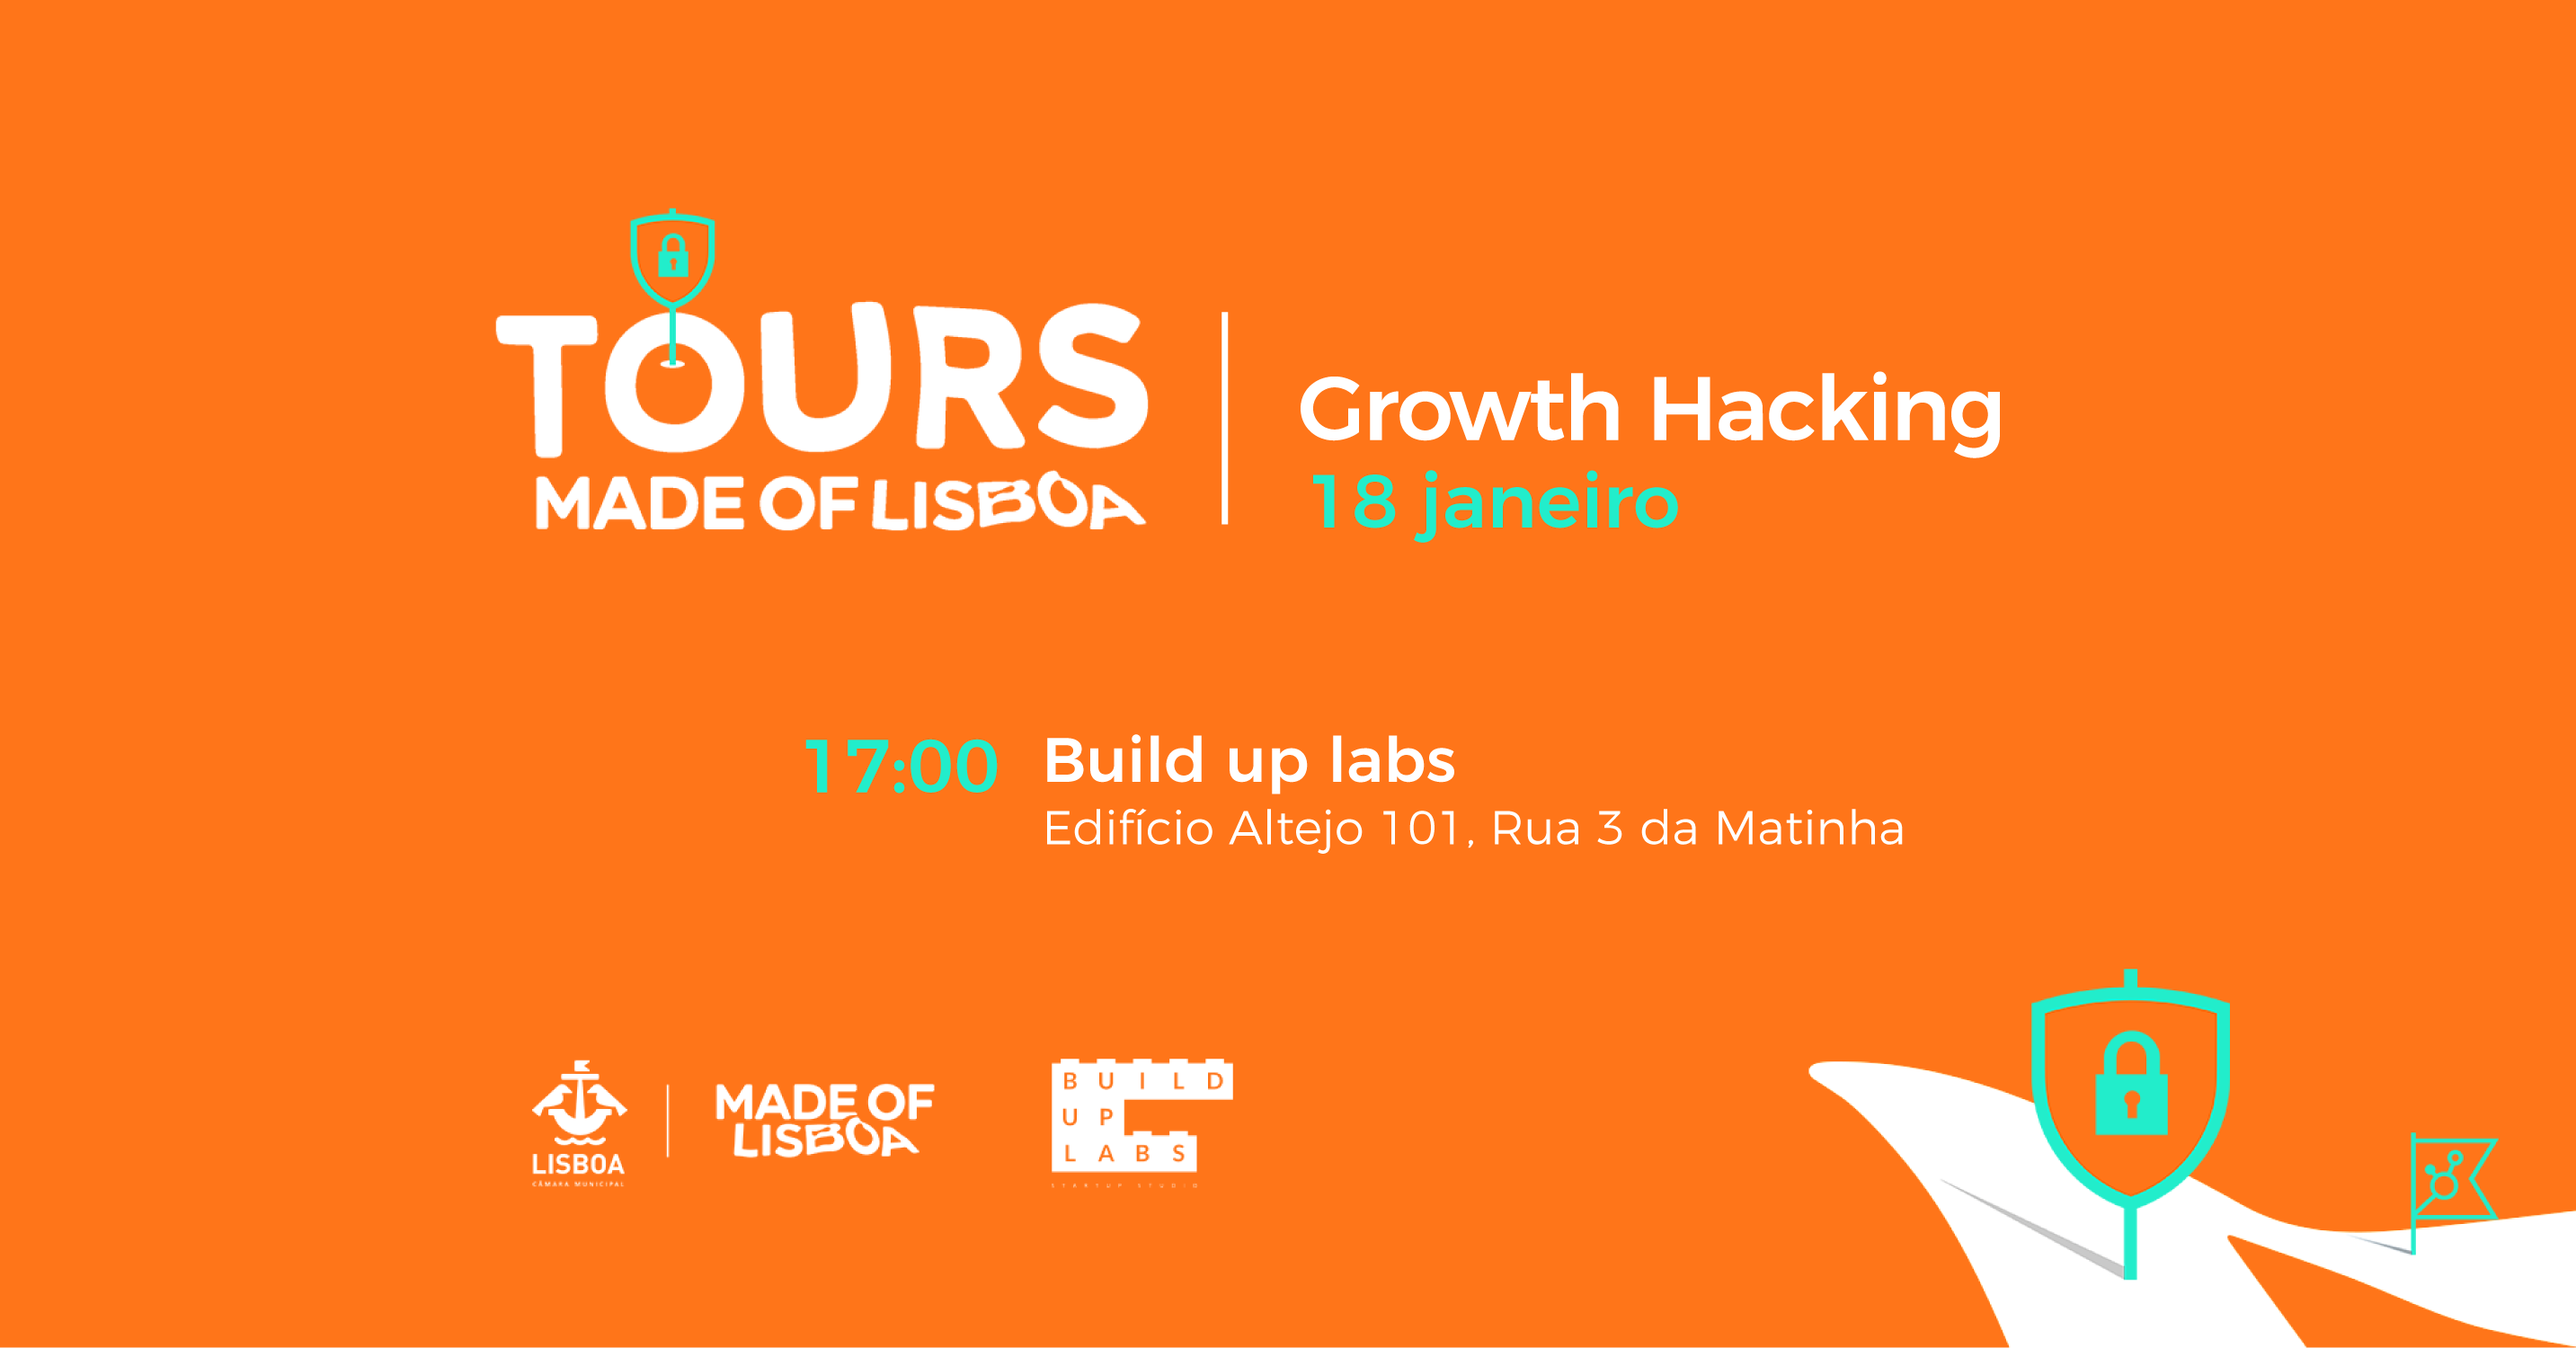 Tour Made of Lisboa – Growth Hacking